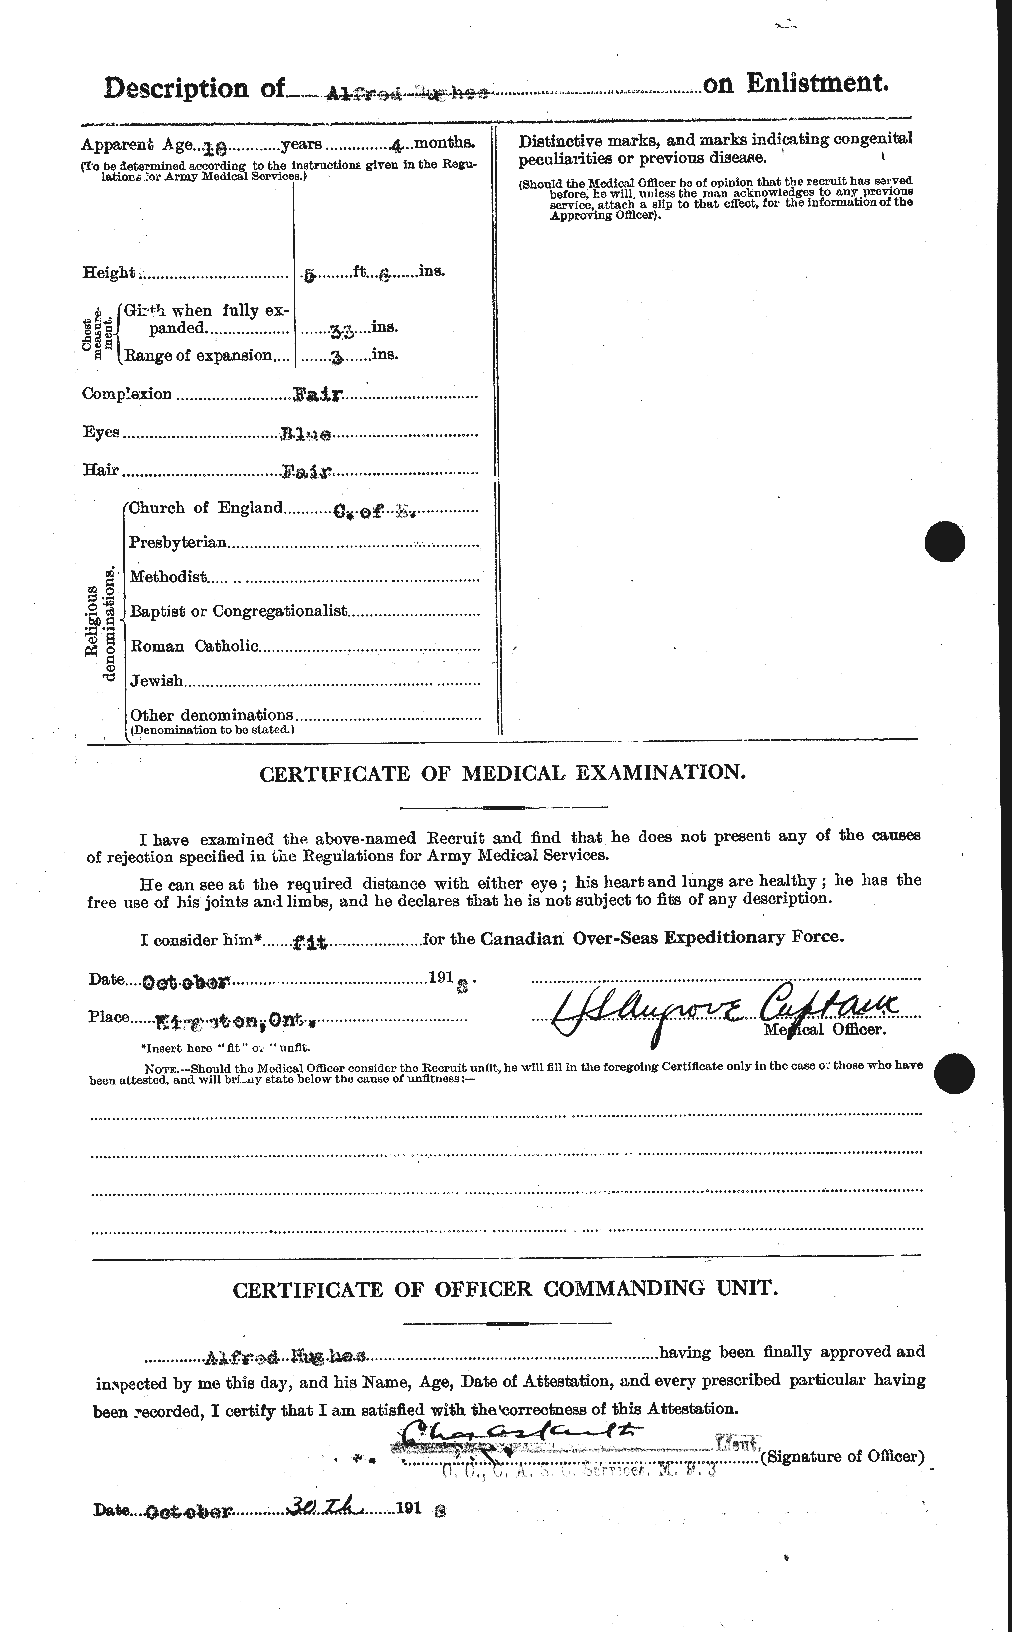 Personnel Records of the First World War - CEF 402537b